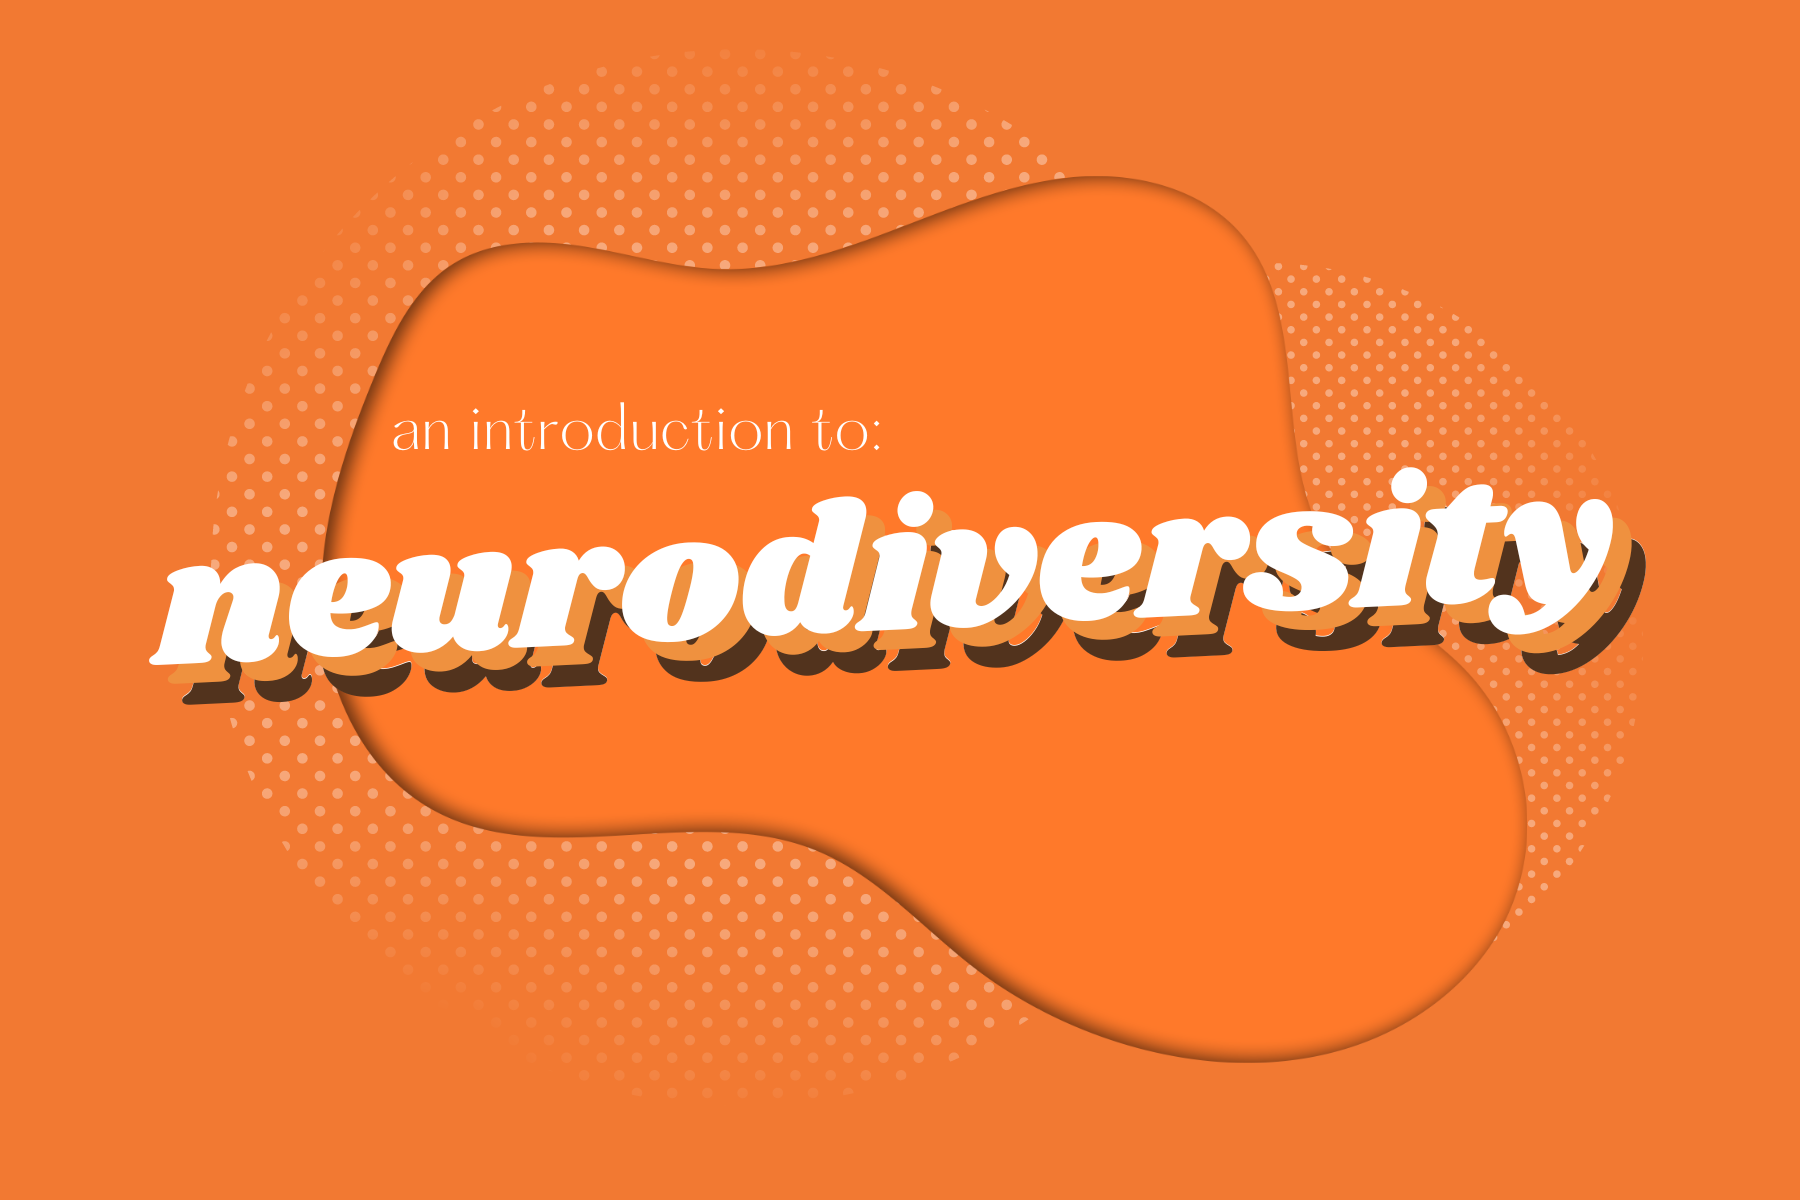 An Introduction to Neurodiversity